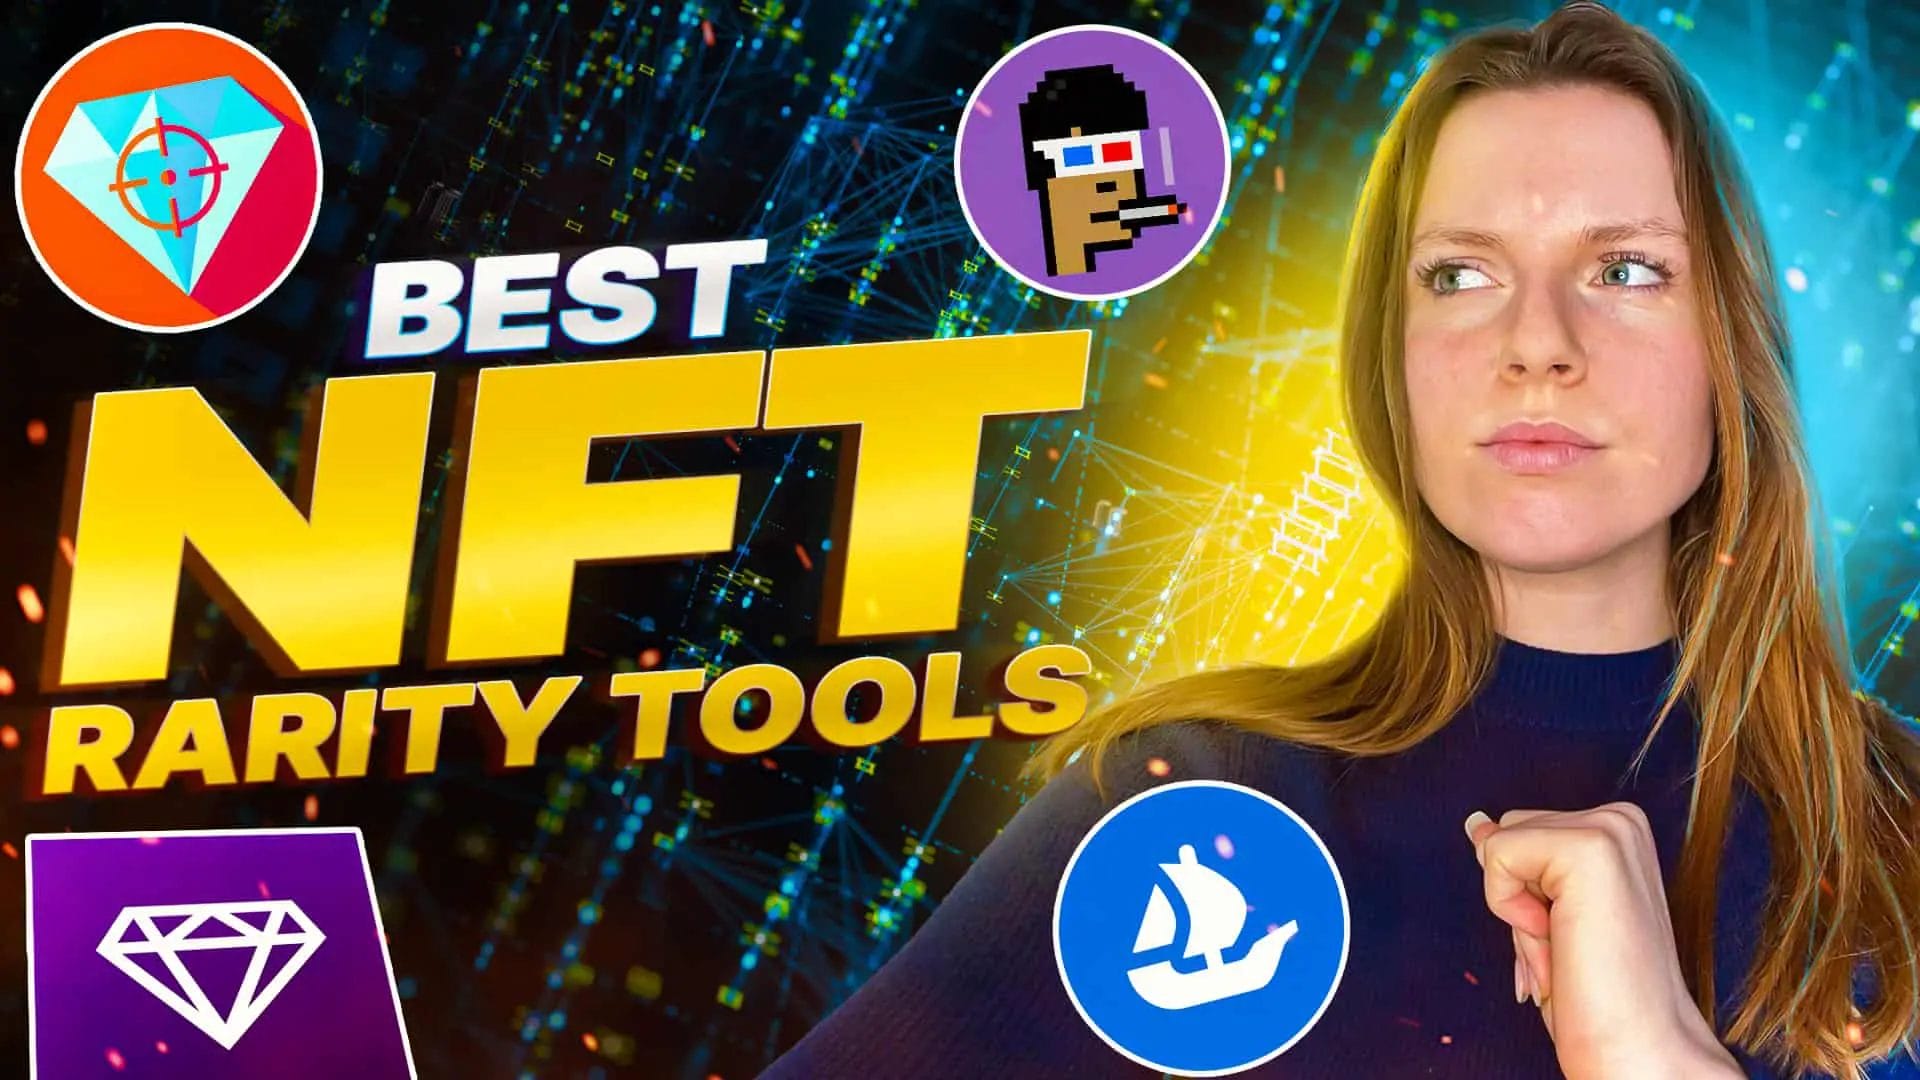 Best NFT Rarity Tools to Check NFT Rarity Ranking